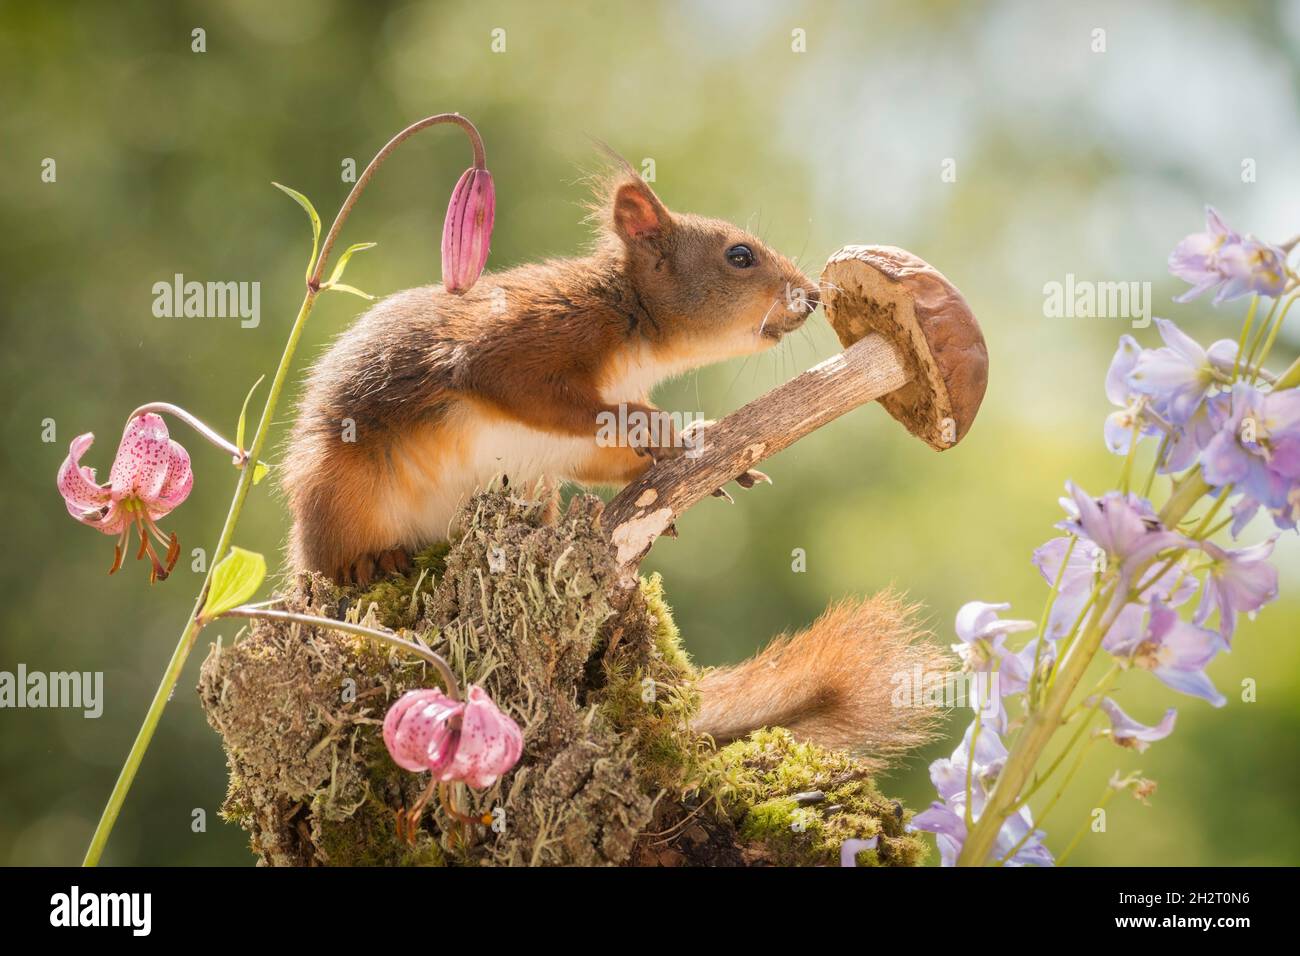 red squirrel  is holding a mushroom with flowers around Stock Photo